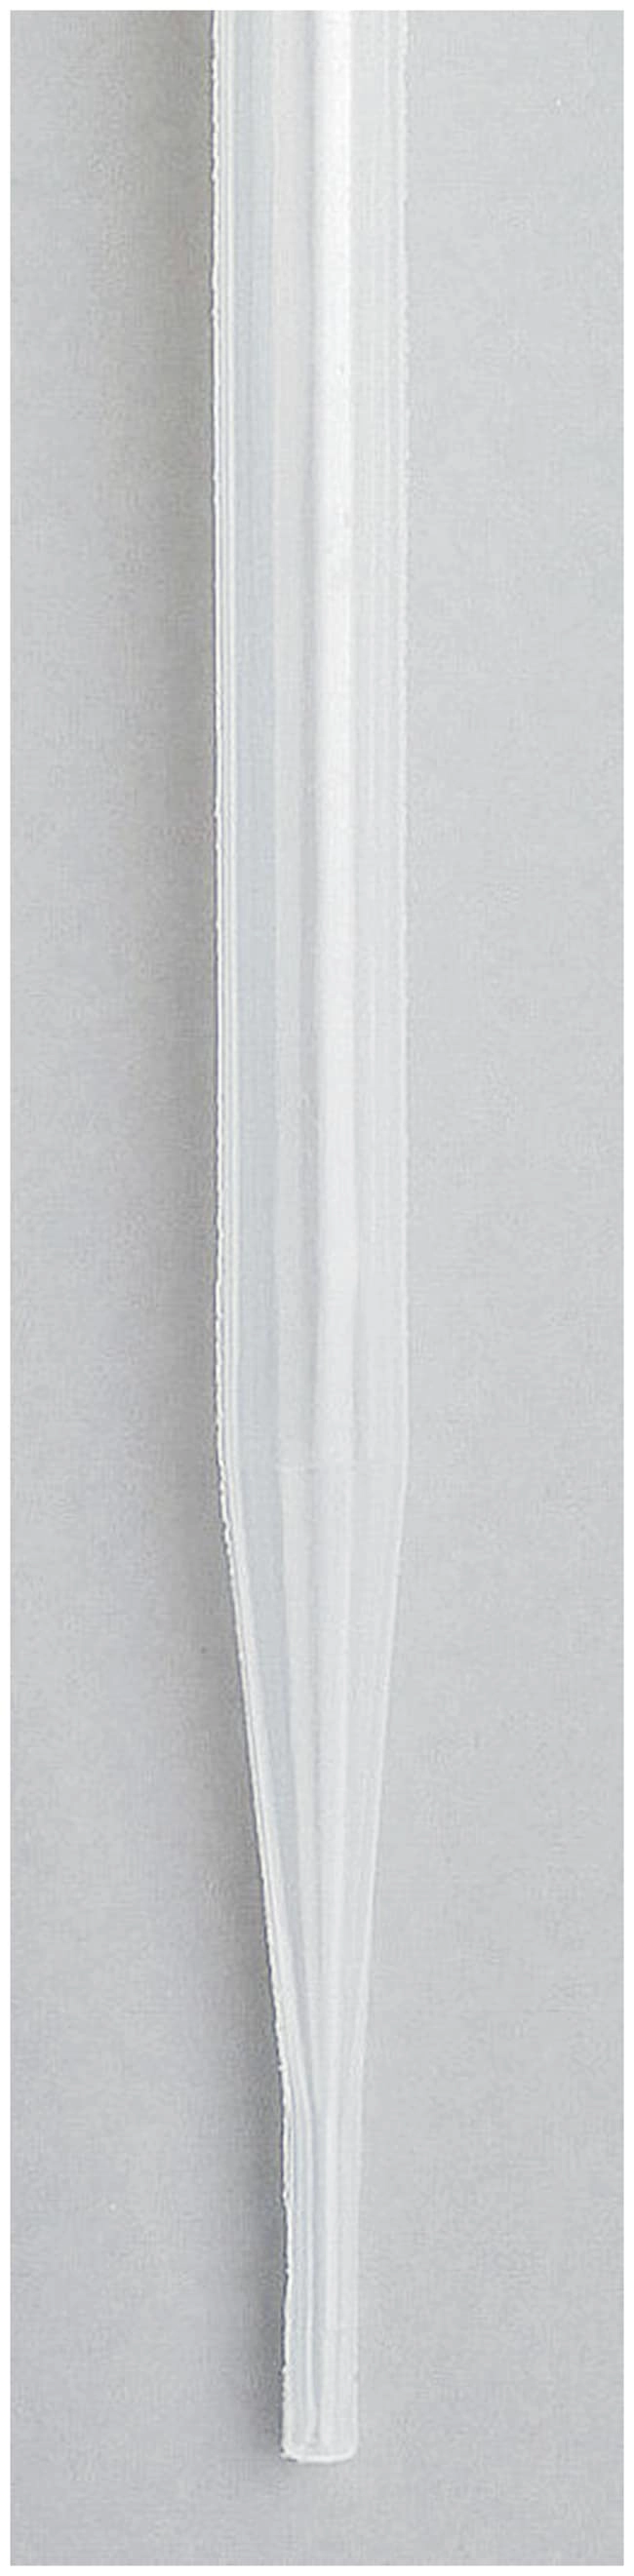 Samco Extra Long Transfer Pipettes